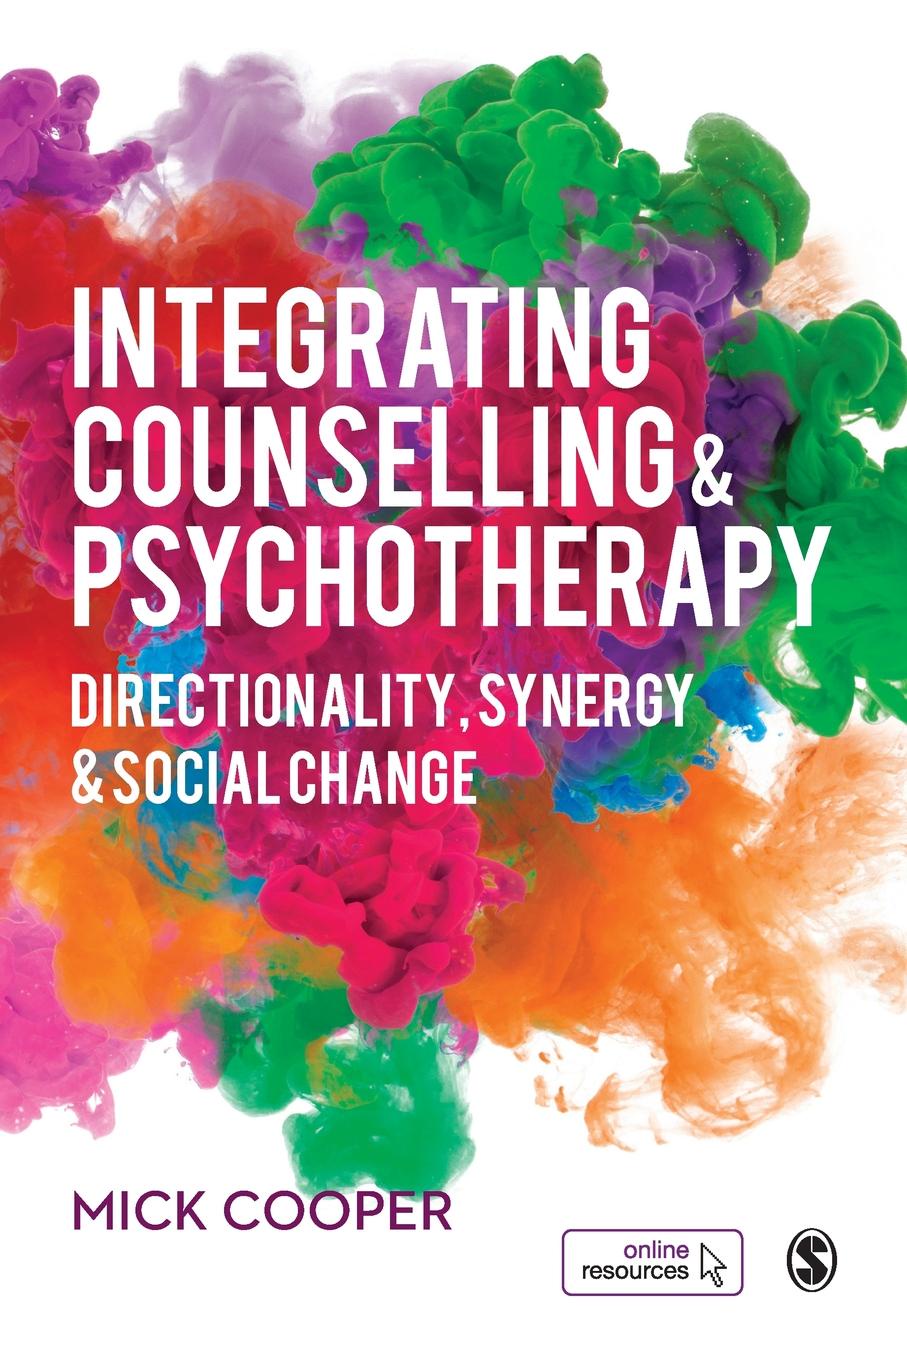 Integrating Counselling & Psychotherapy. Directionality, Synergy and Social Change